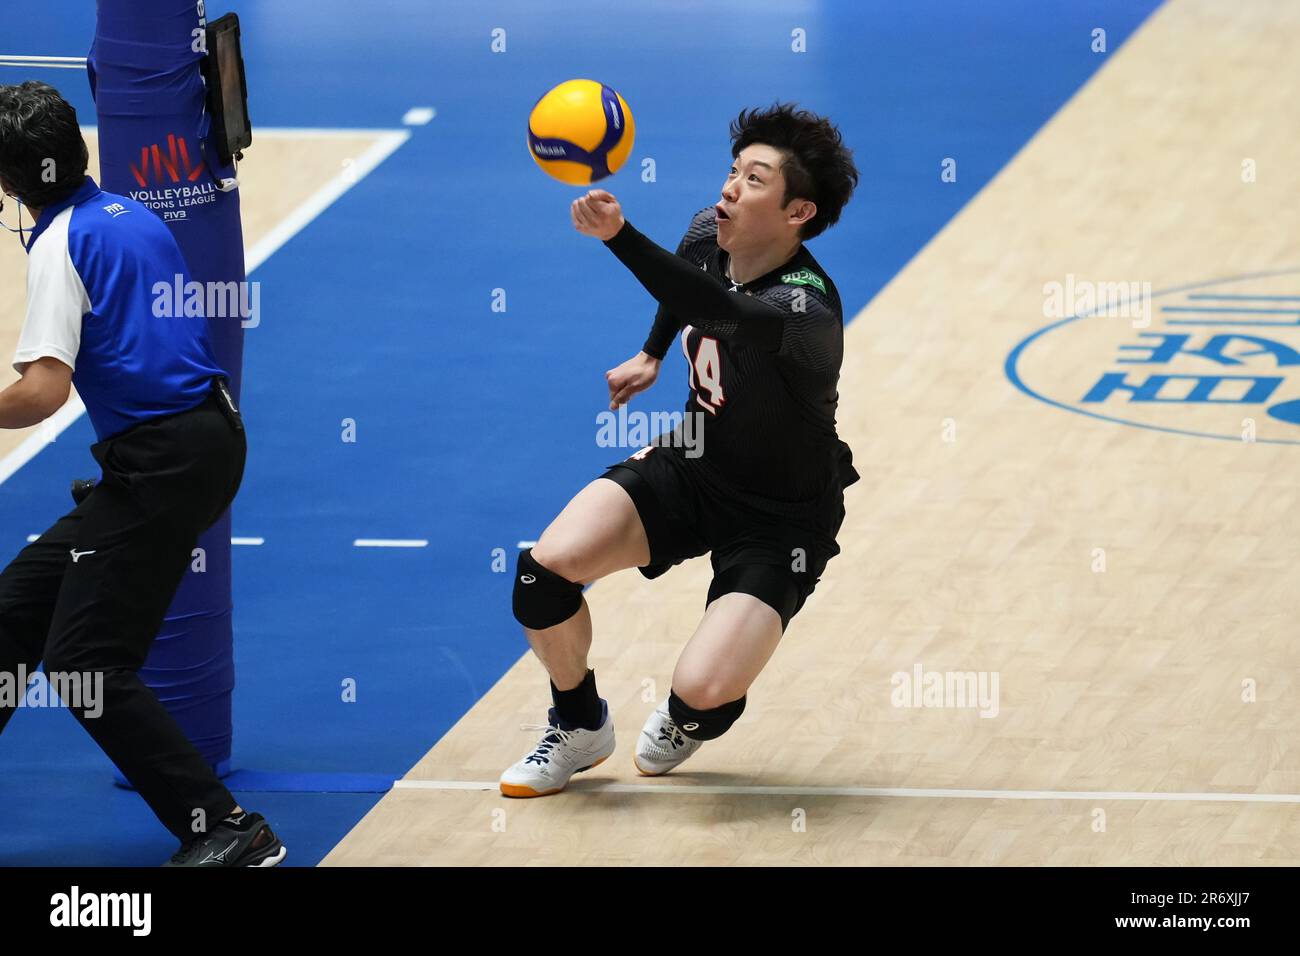 nations league volleyball live